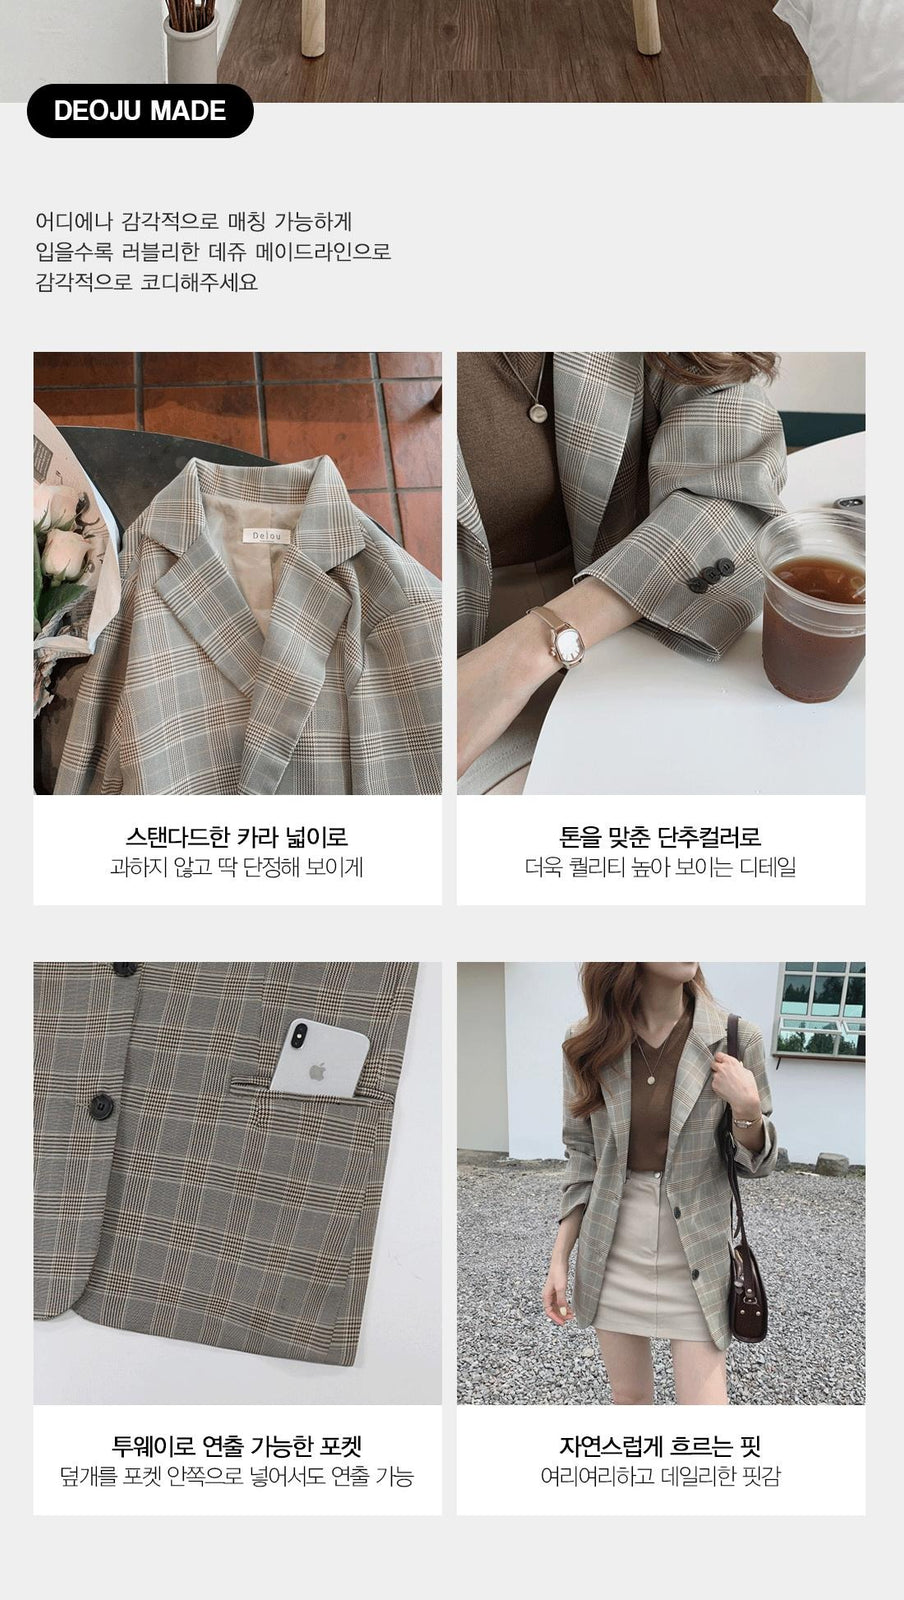 Vintage Notched Collar Plaid Breasted Jacket Casual Blazer Coat